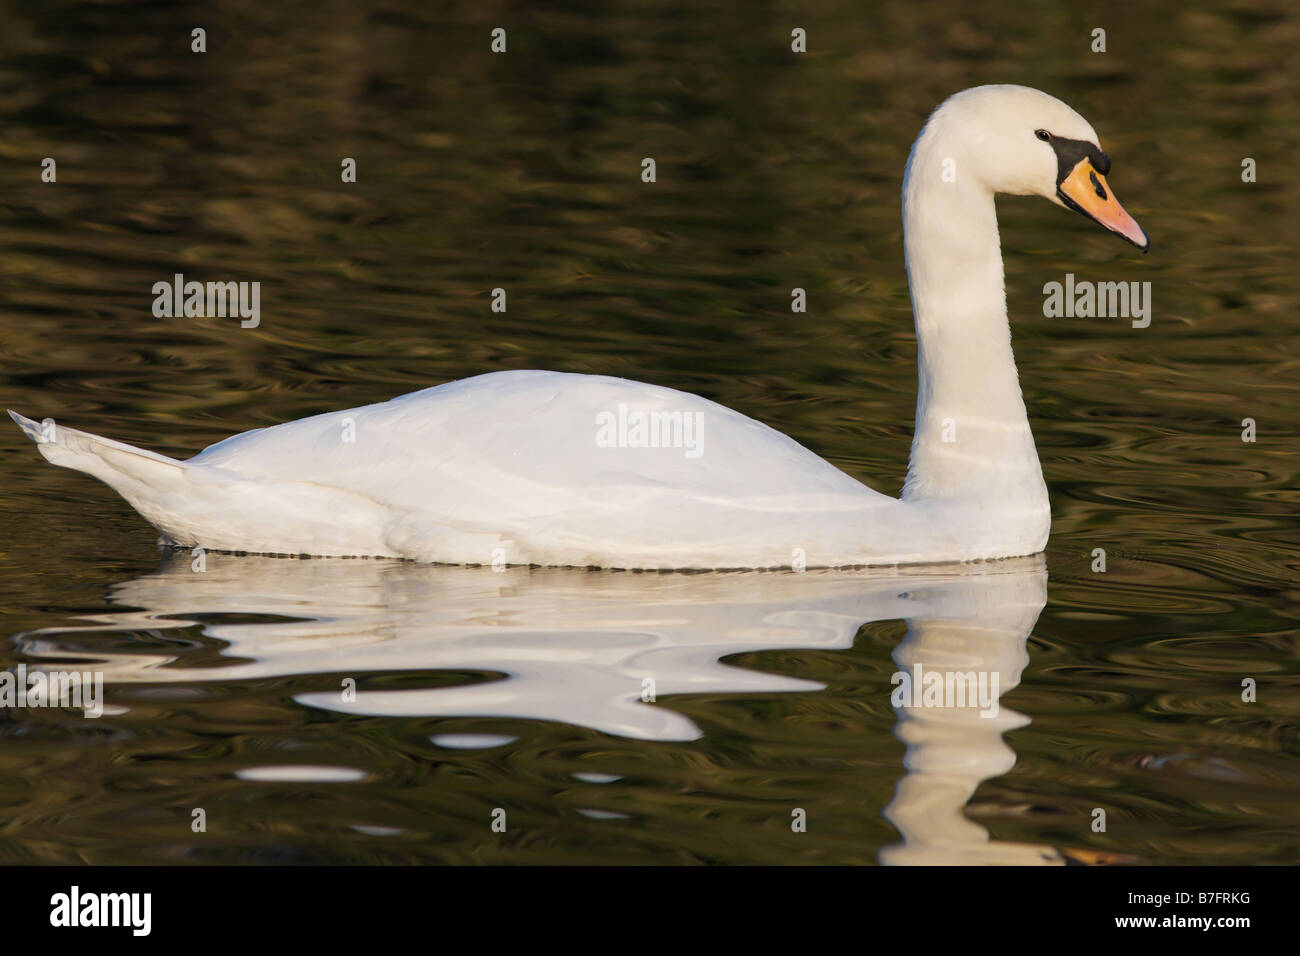 A Swan bathed in evening light Stock Photo